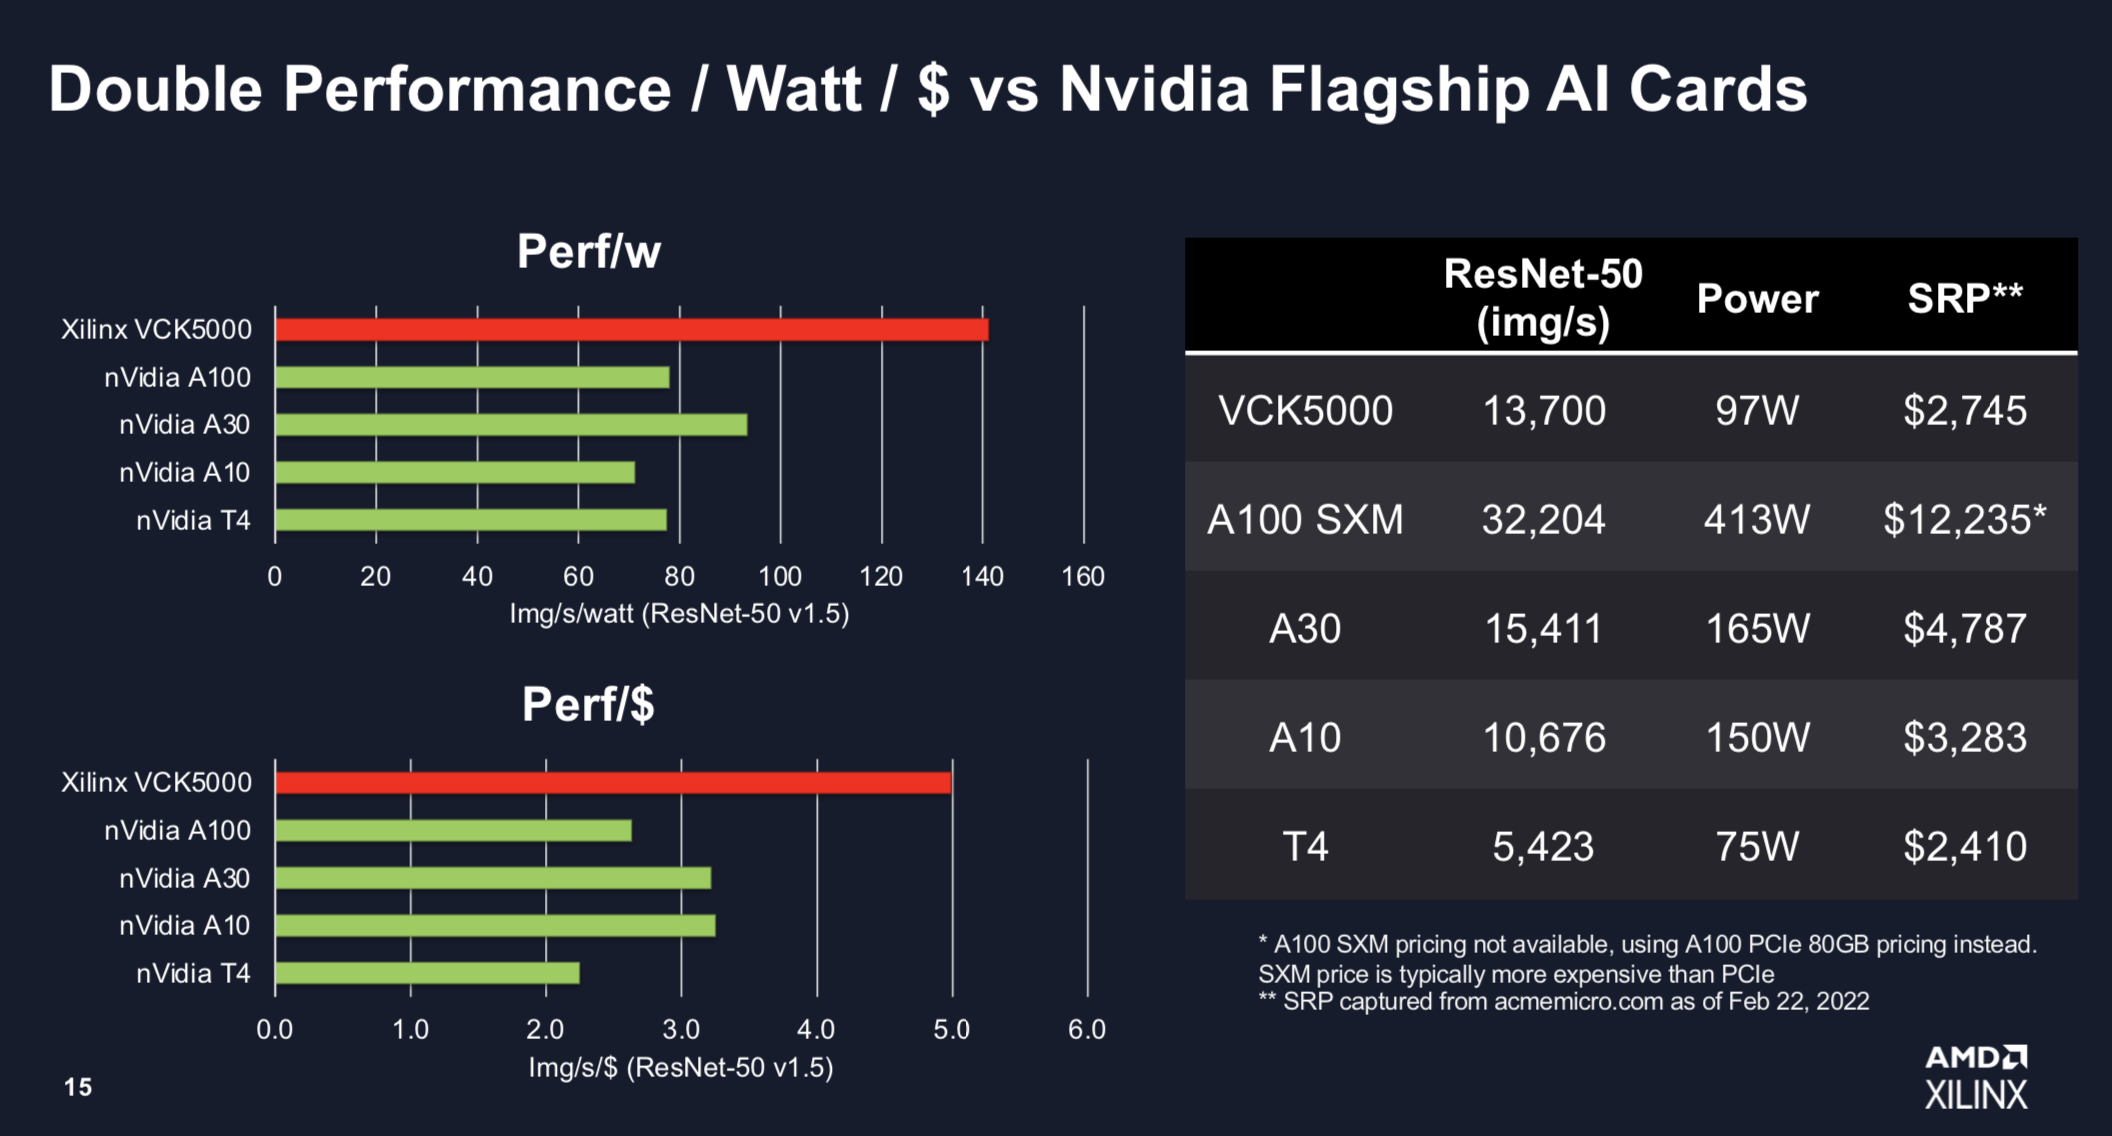 AMD/Xilinx Takes Aim at Nvidia with Improved VCK5000 Inferencing Card